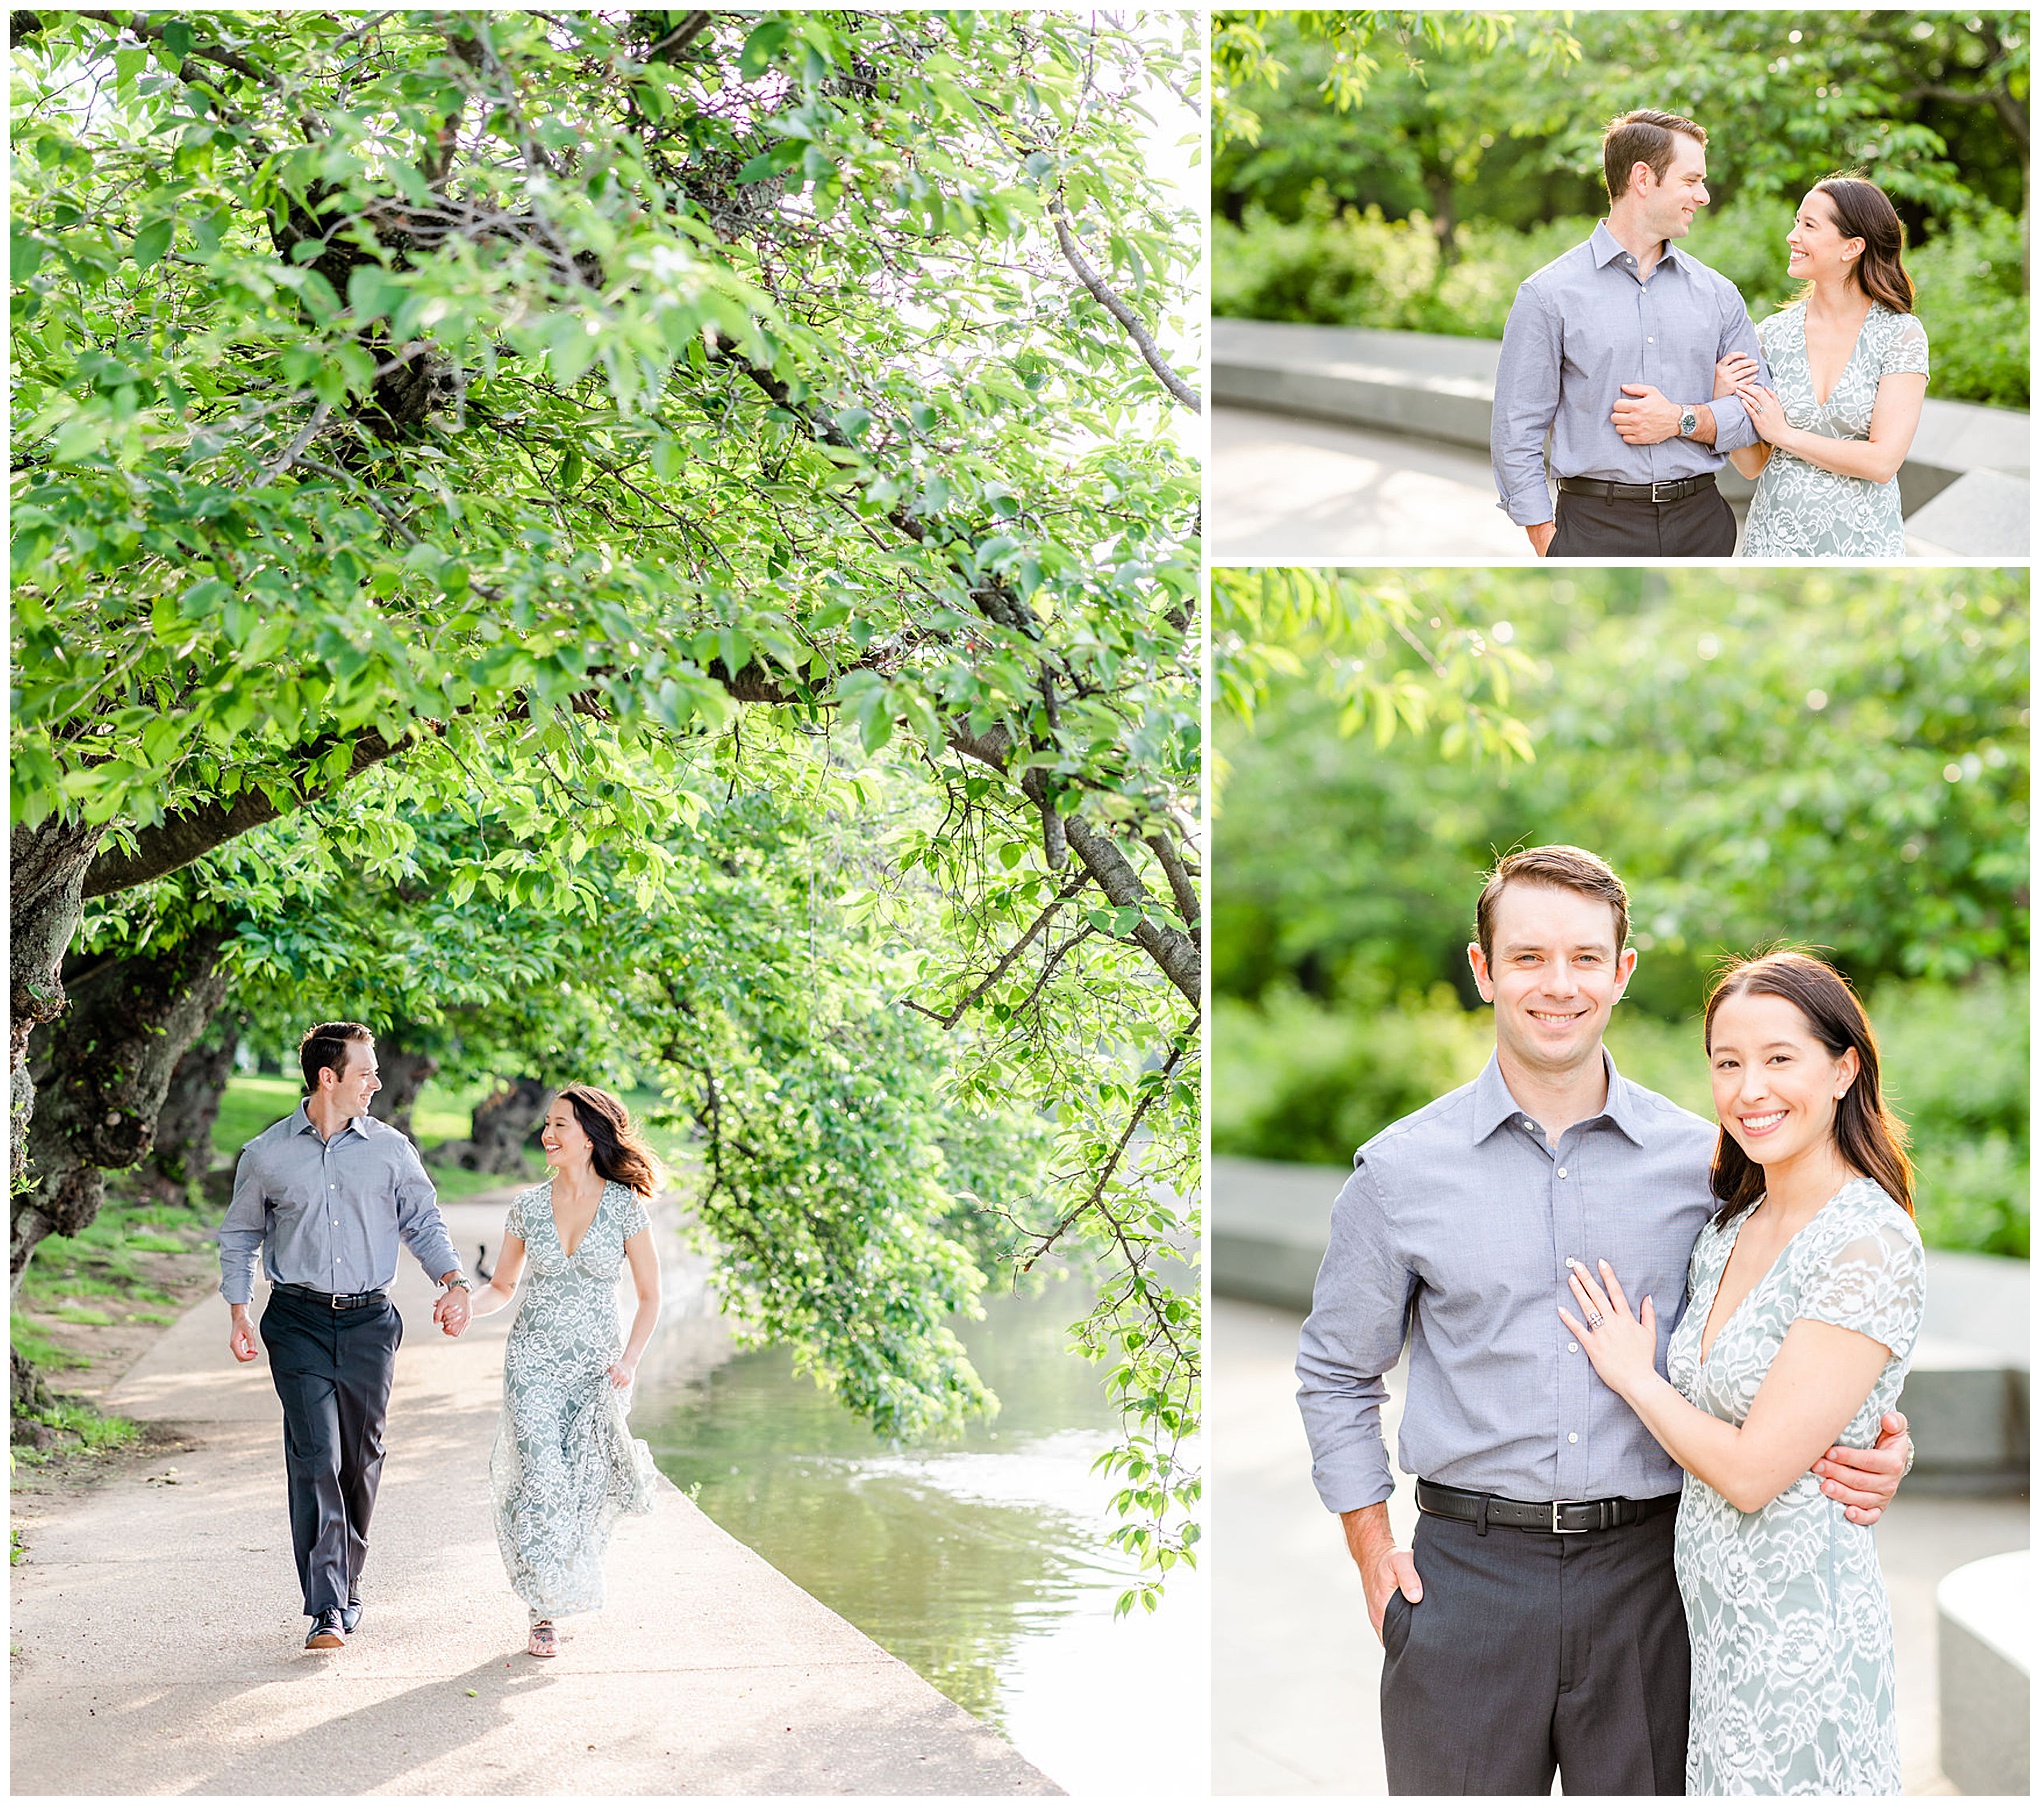 pink sunrise Lincoln Memorial engagement, DC engagement session, DC engagement photographer, formal DC engagement photos, DC elopement photographer, DC wedding photographer, classic DC engagement photos, luxury DC engagement photographer, Rachel E.H. Photography, couple running holding hands, couple smiling